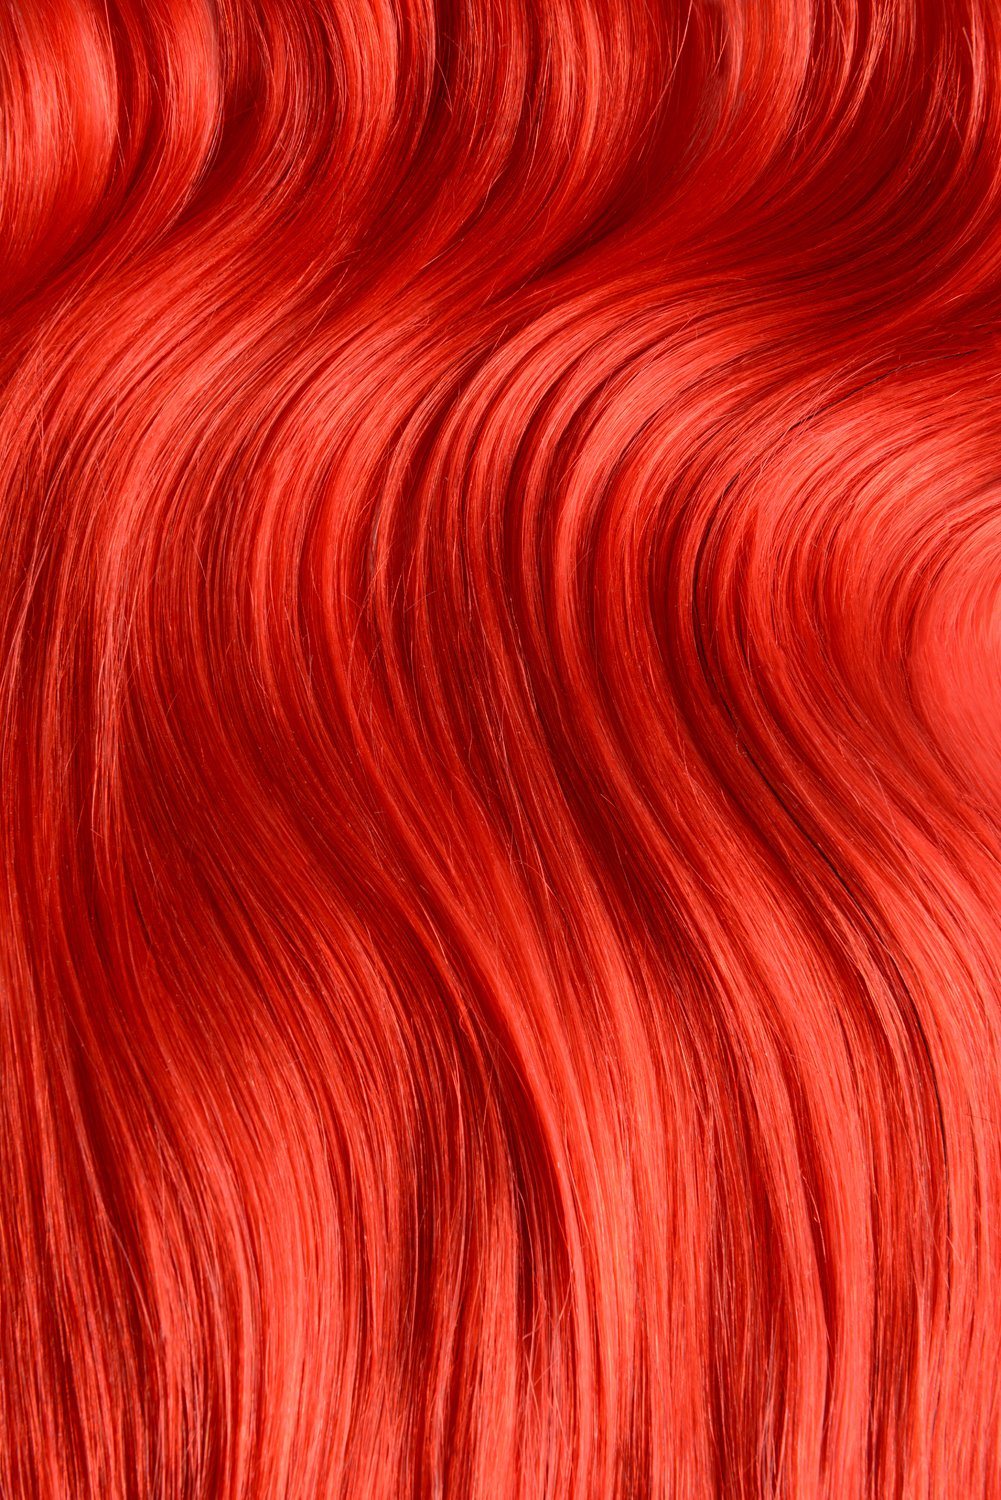 Double Wefted Full Head Remy Clip in Human Hair Extensions - Bright Red Double wefted full head cliphair 